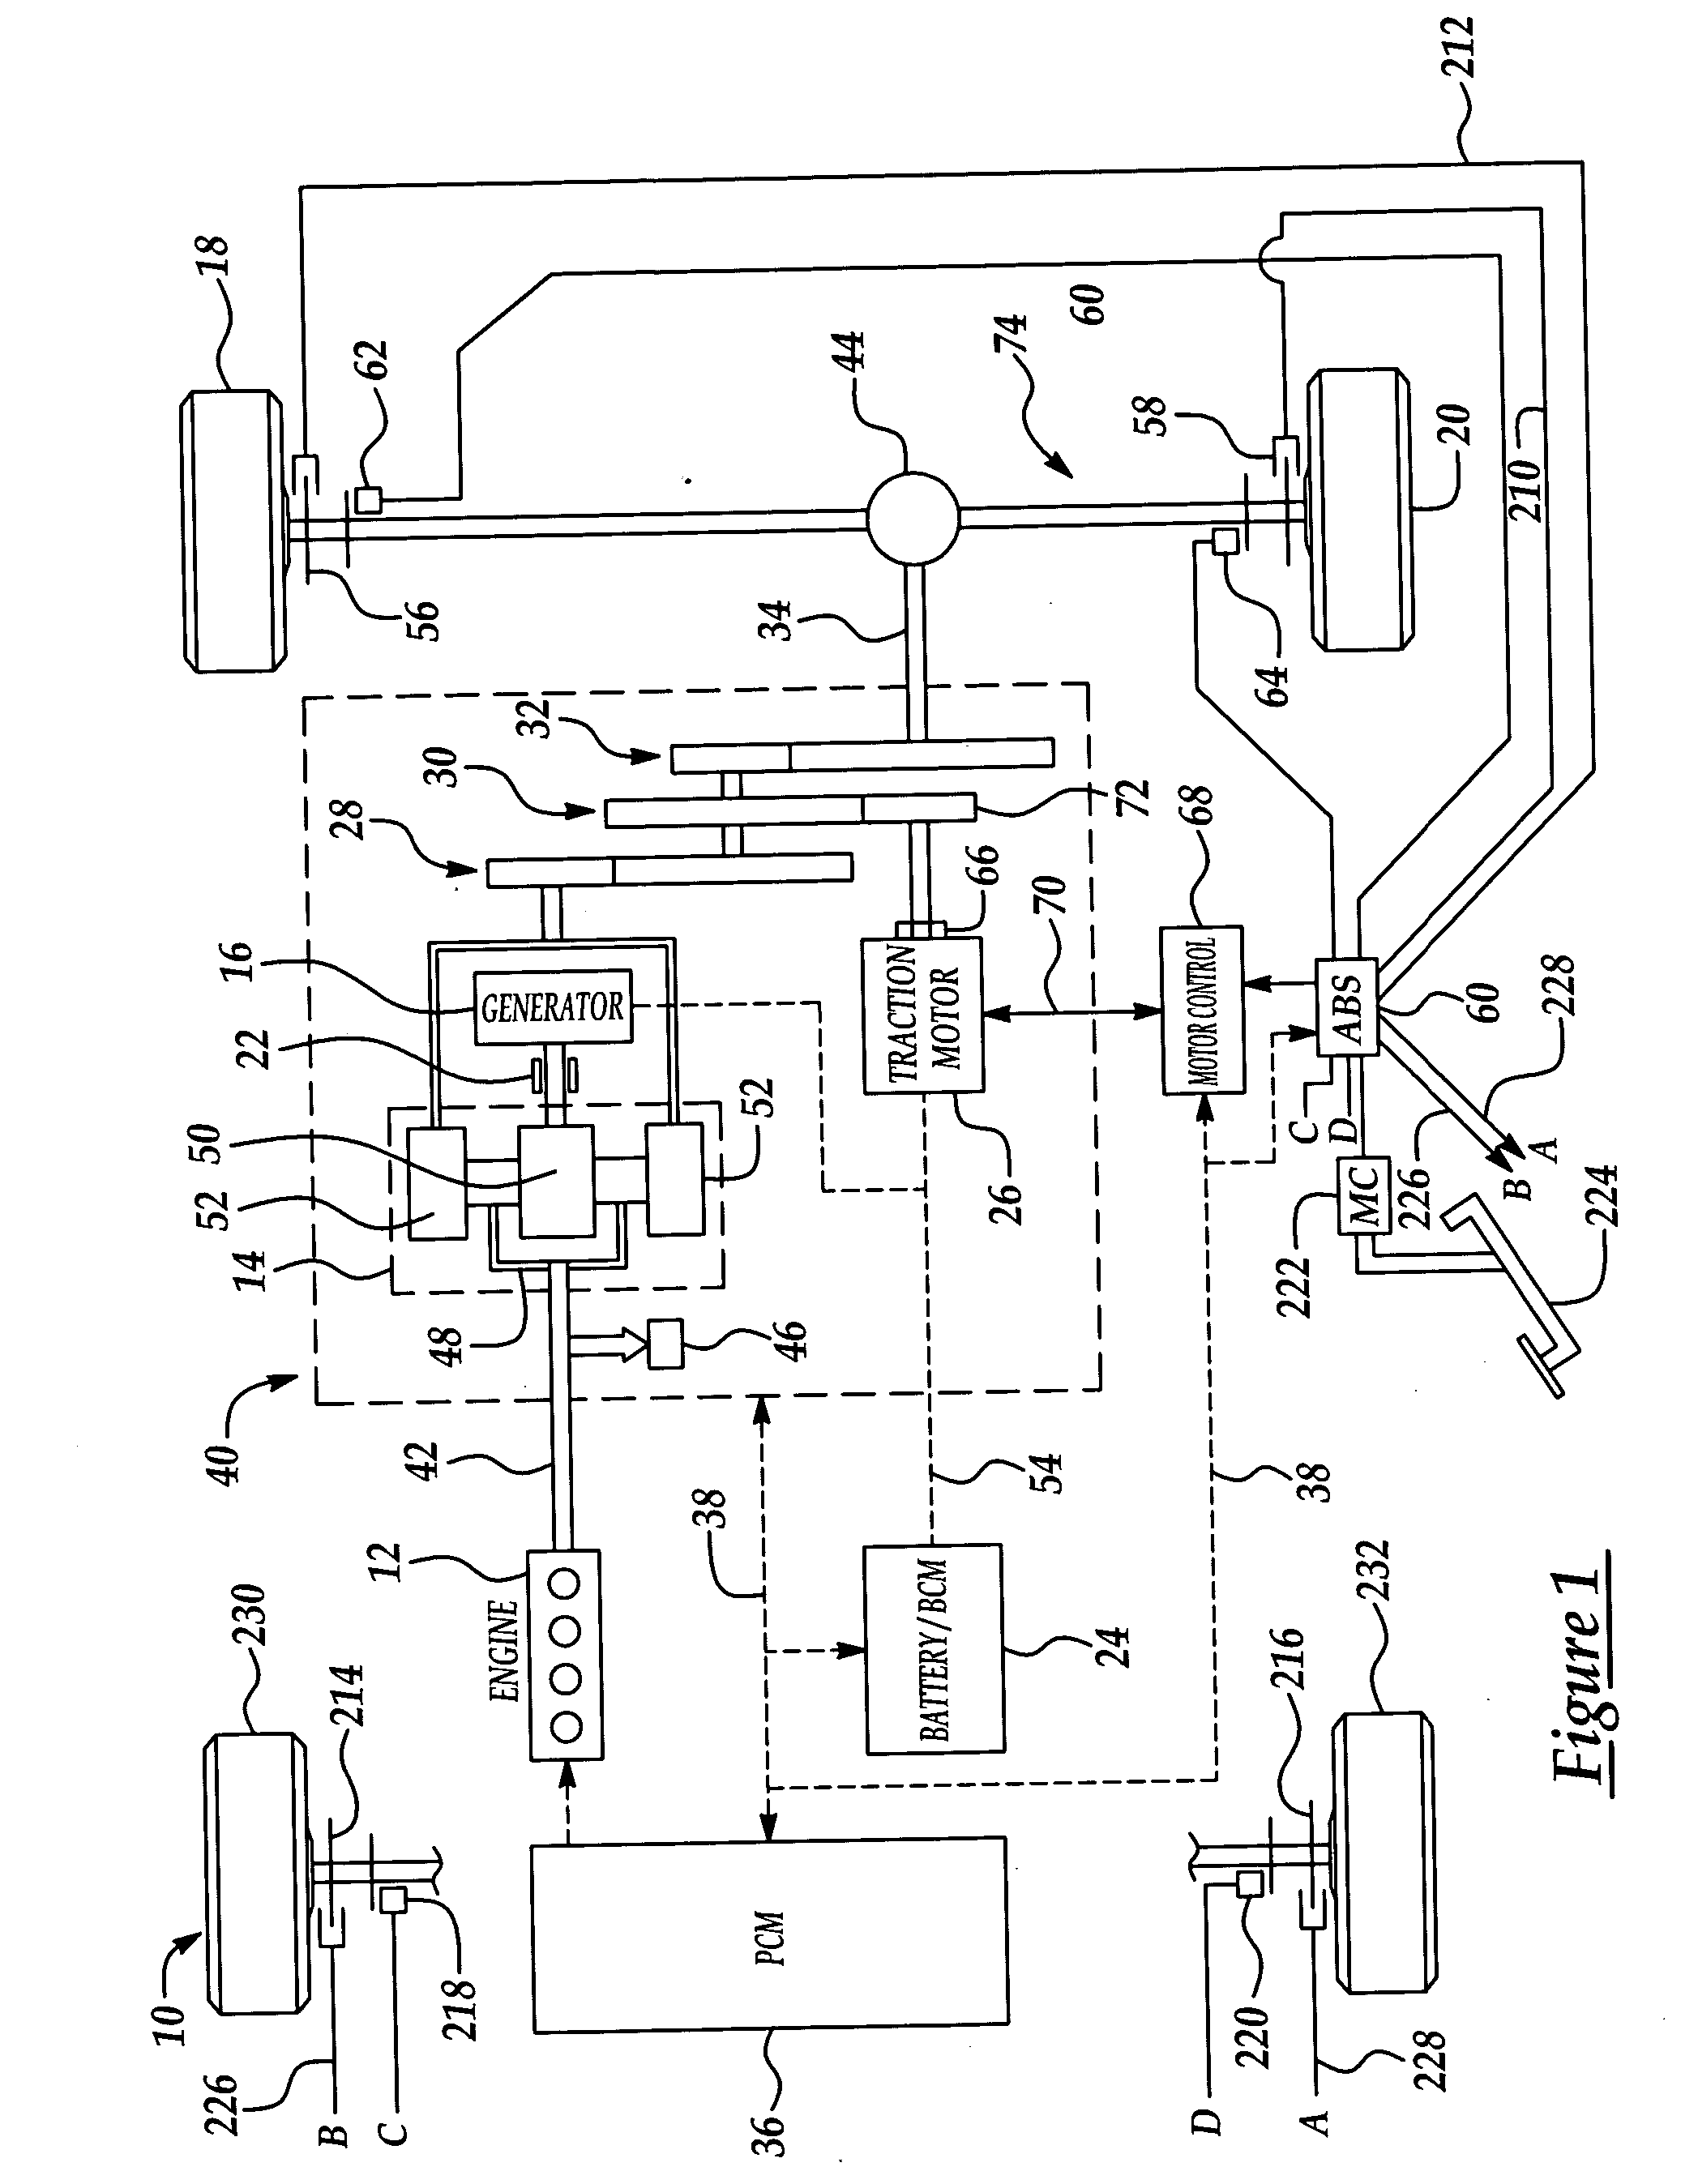 Active motor damping to mitigate electric vehicle driveline oscillations